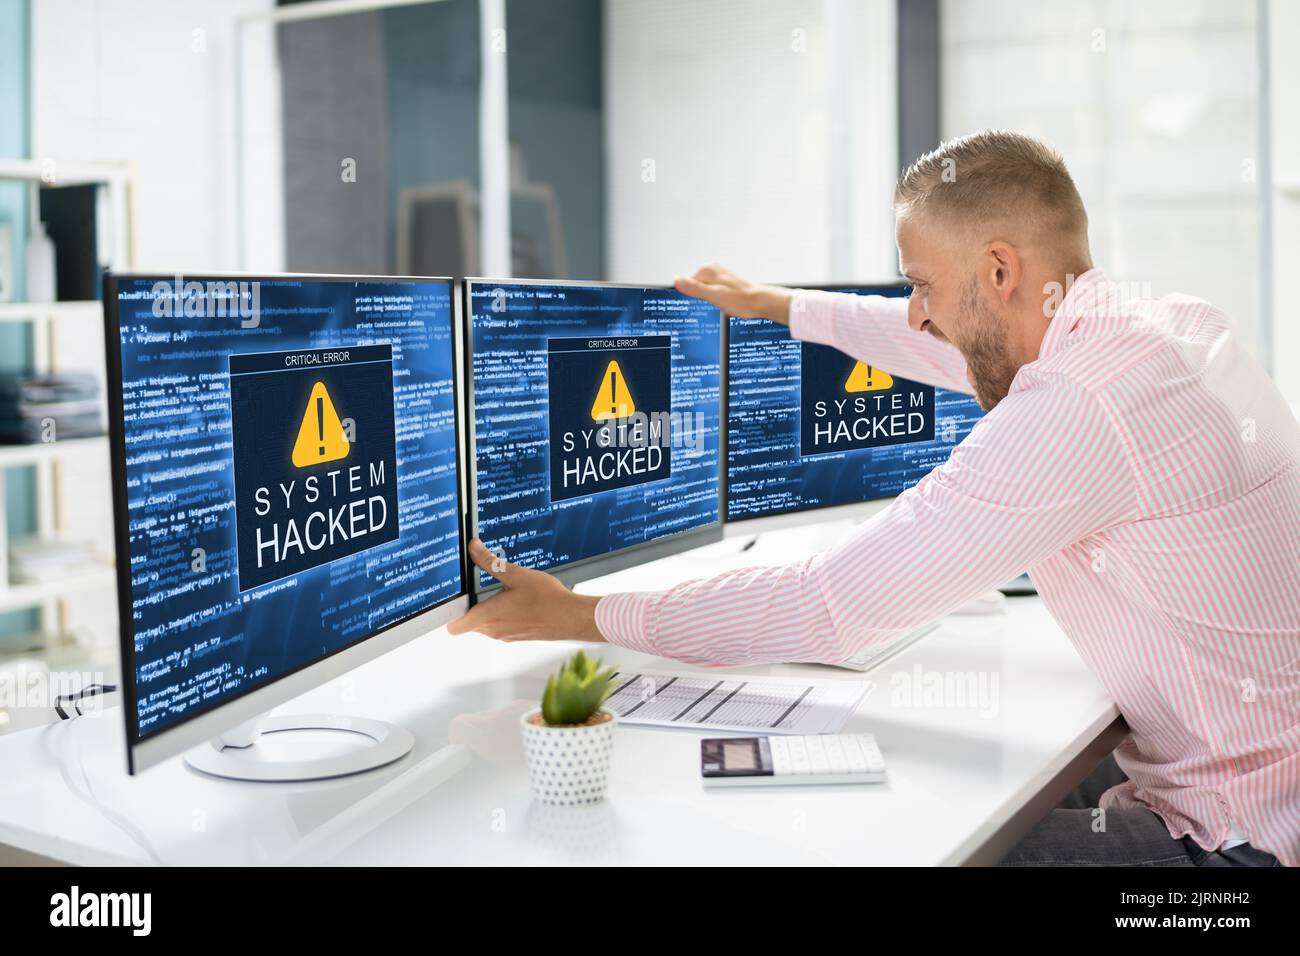 Ransomware Malware Attack. Business Computer Hacked. Security Breach Stock Photo